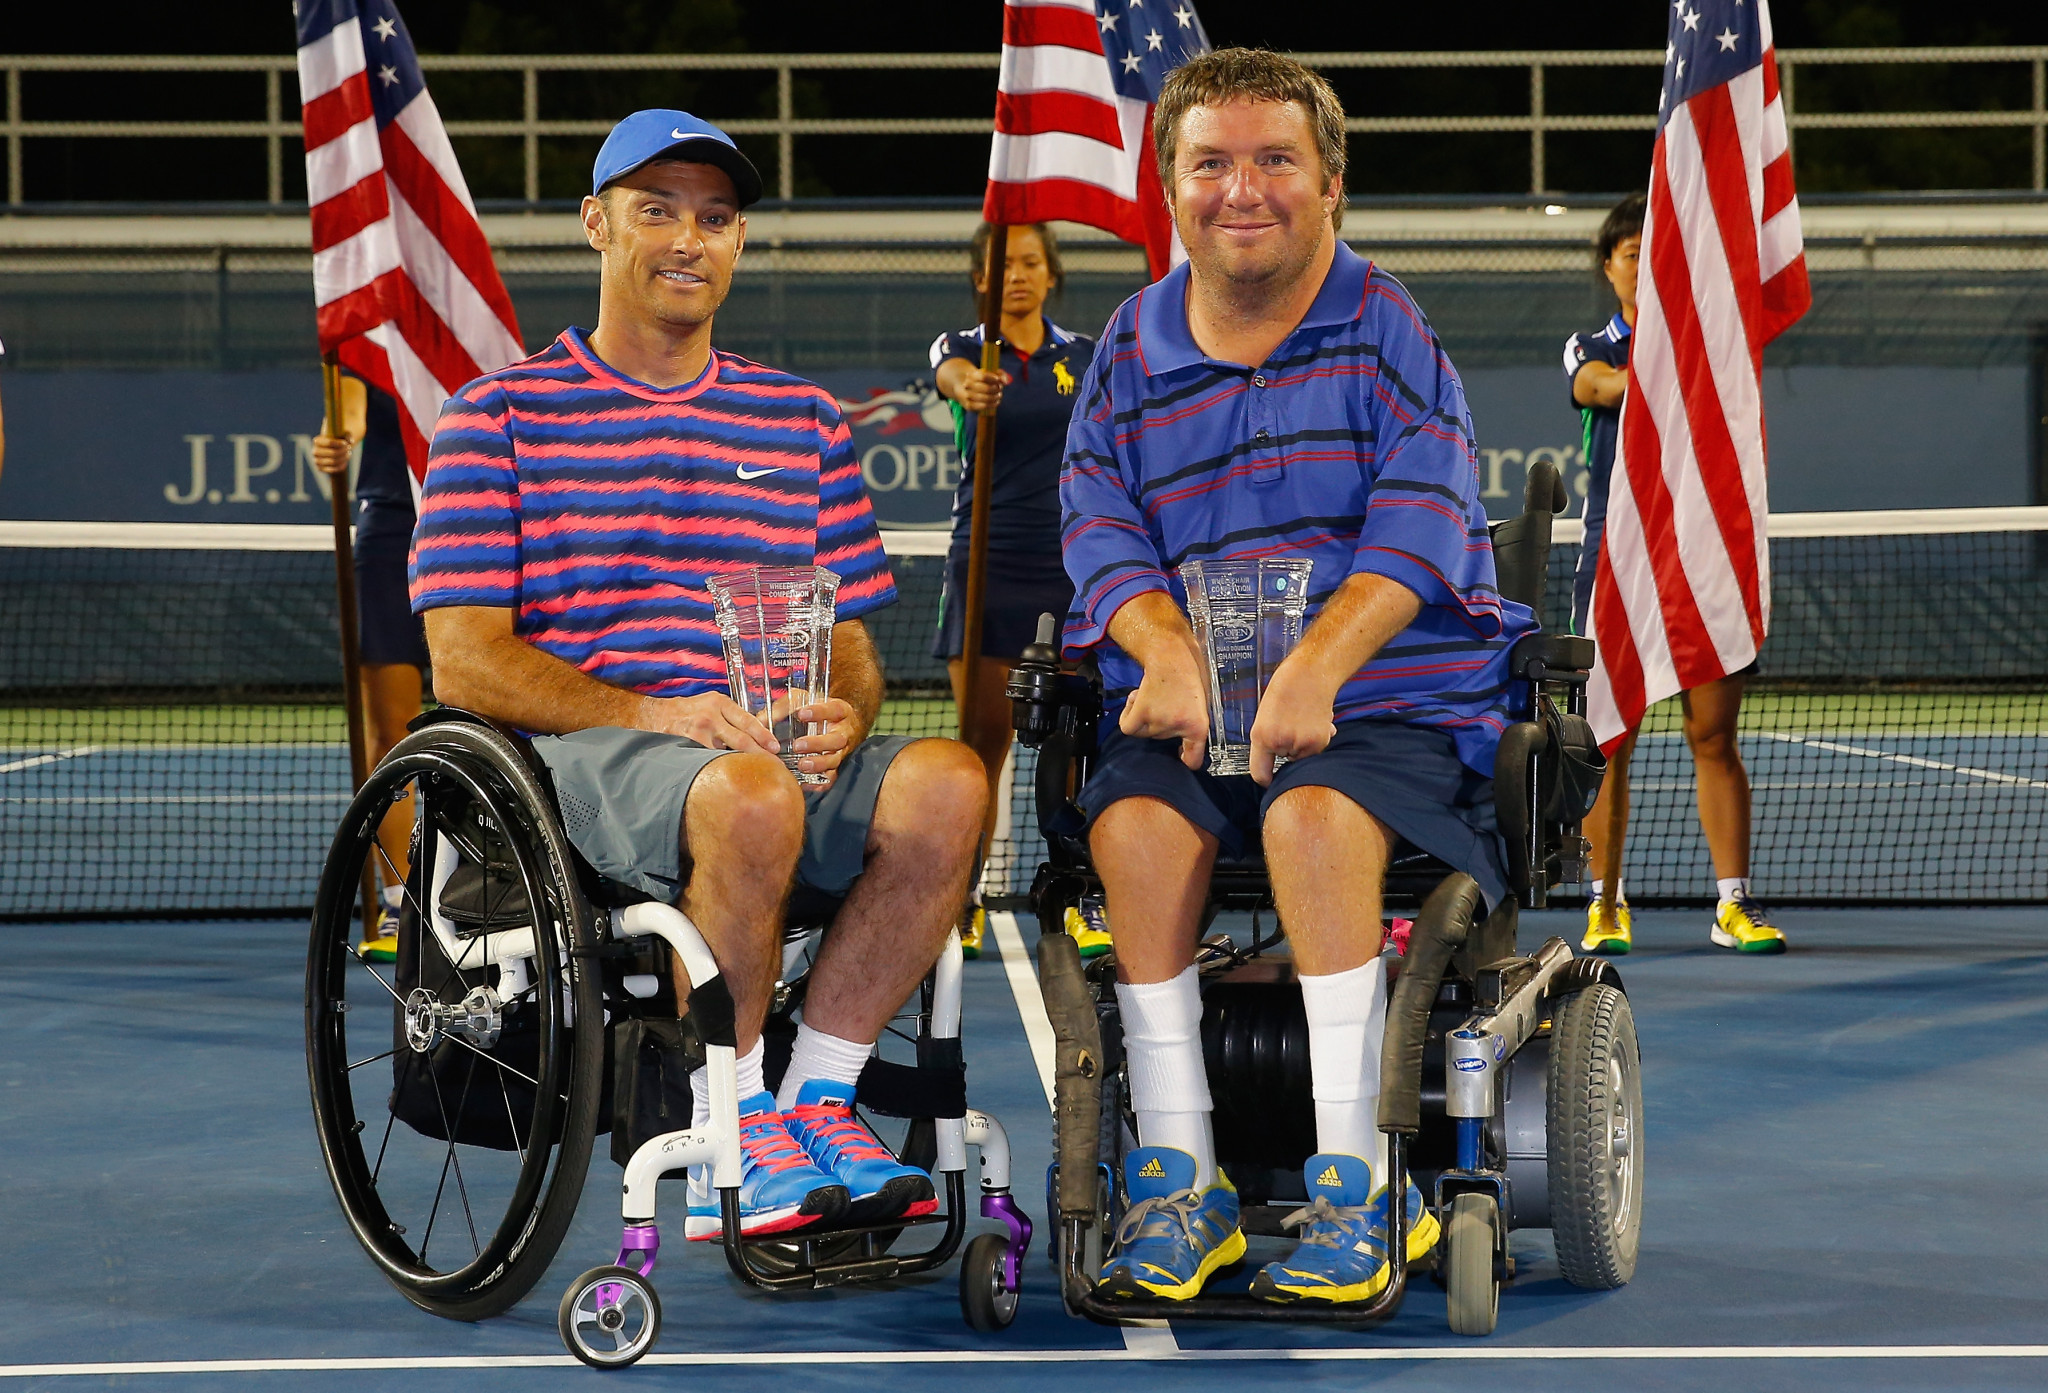 Taylor and Wagner win quads title for second successive year at Wheelchair Doubles Masters 